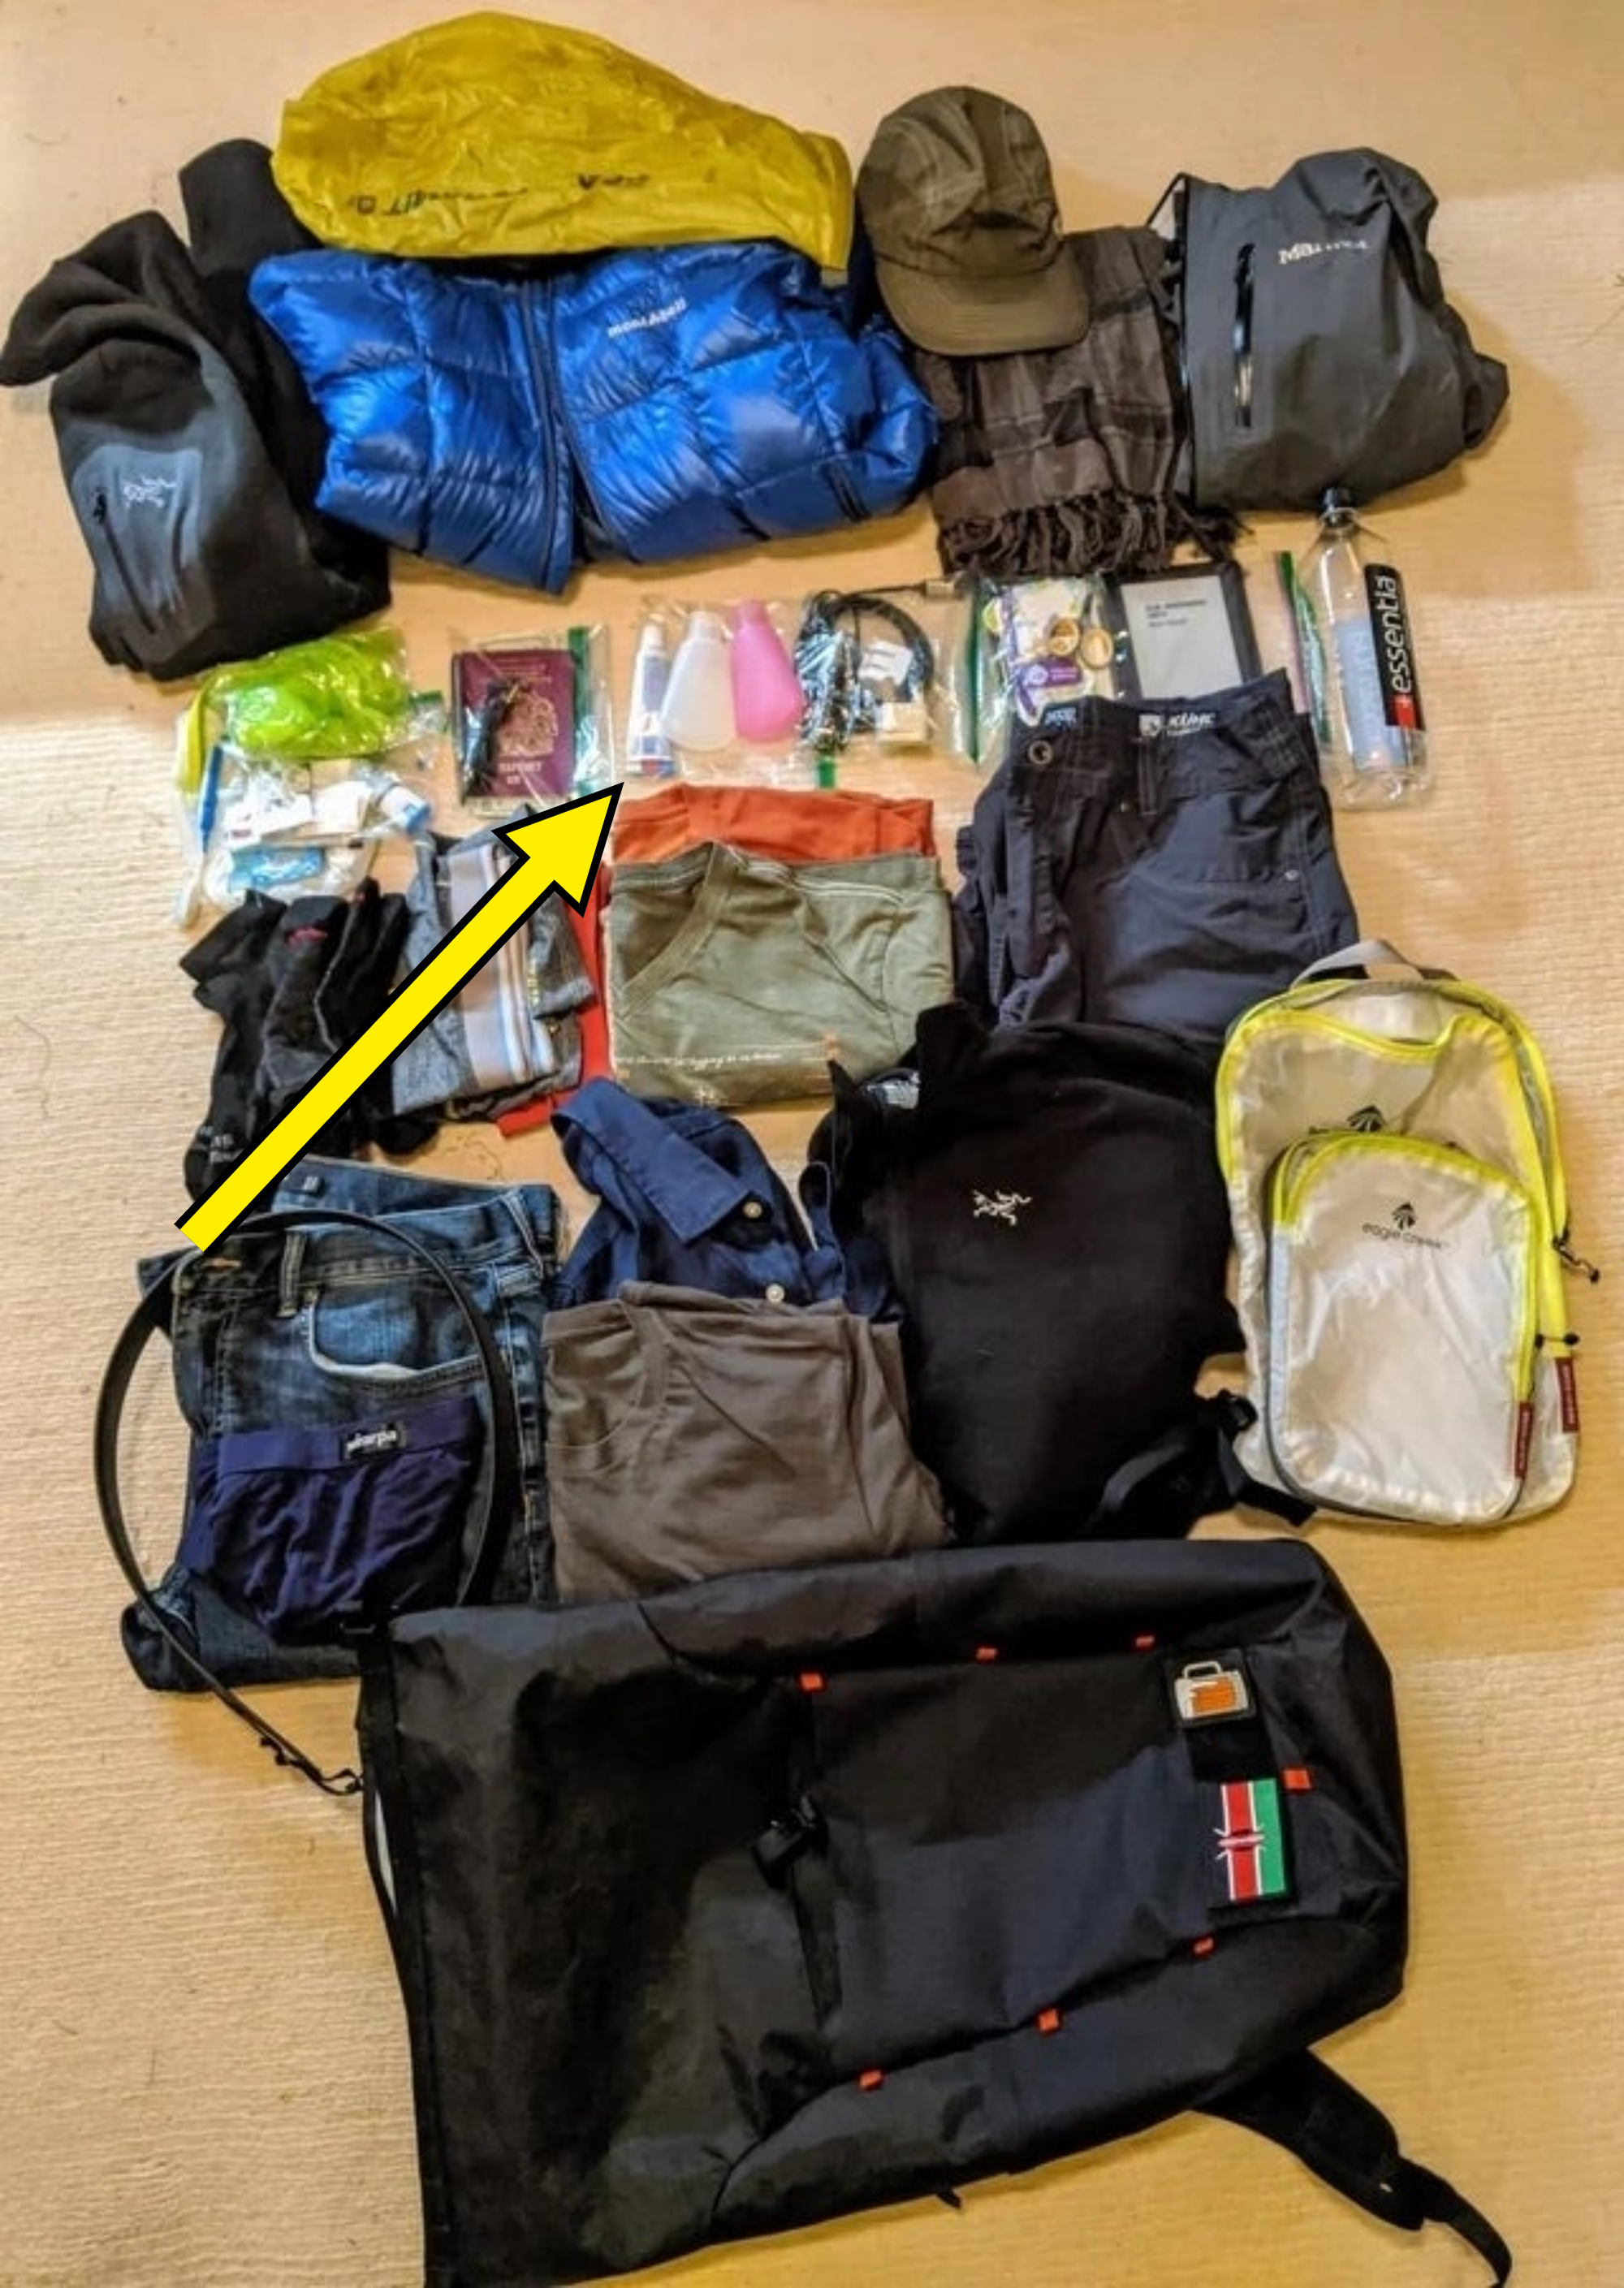 Clothing and other travel items laid flat